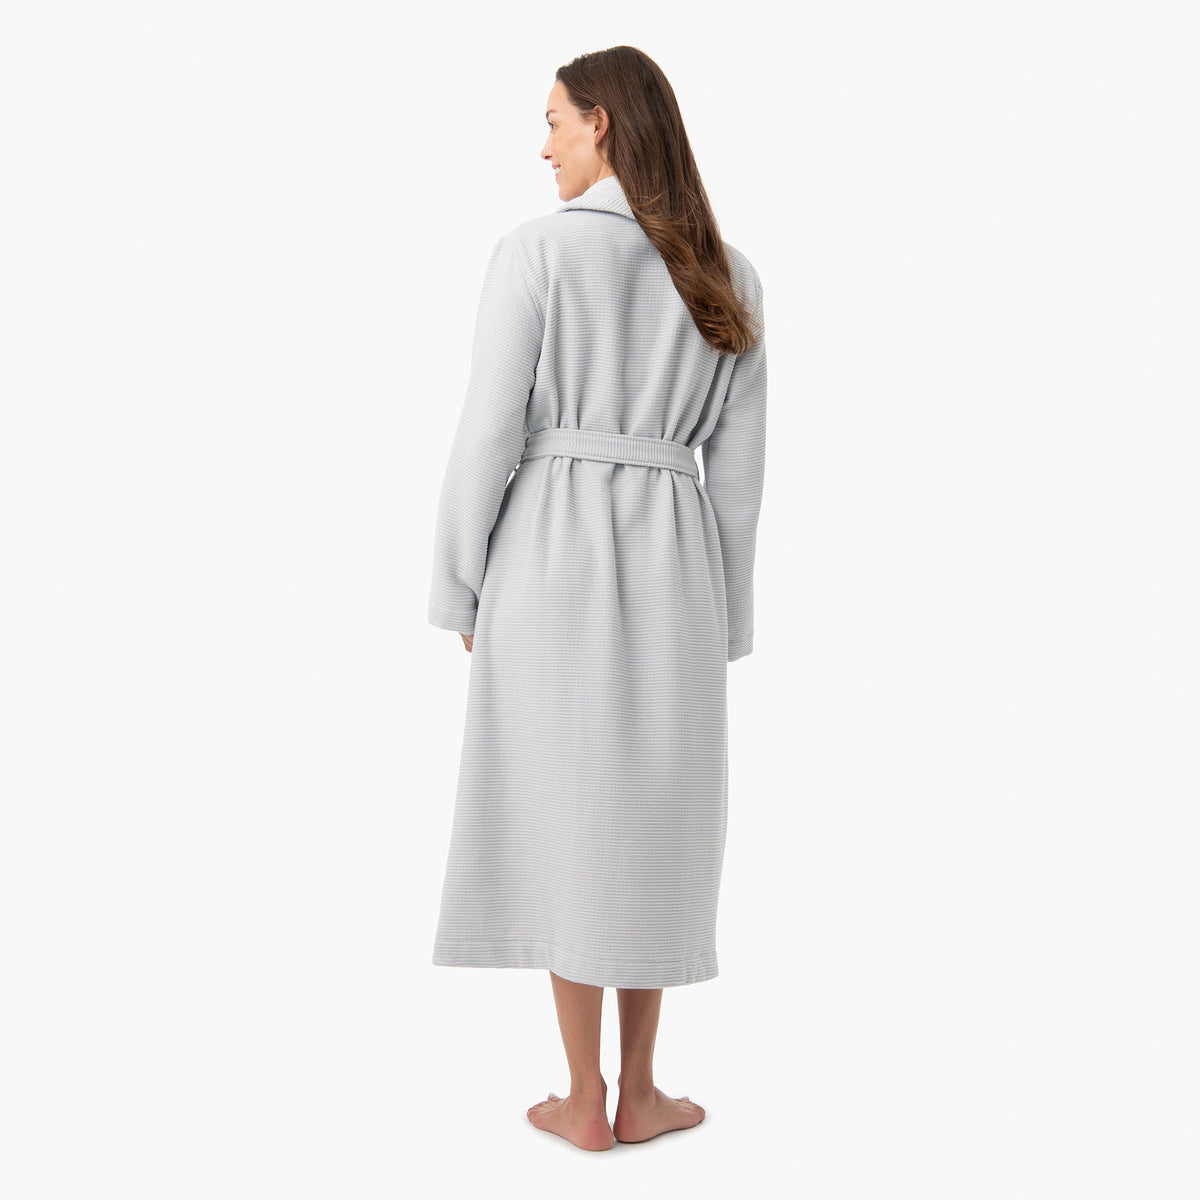 Red Organic Cotton Dressing Gown in Hounds of Love – Yawn